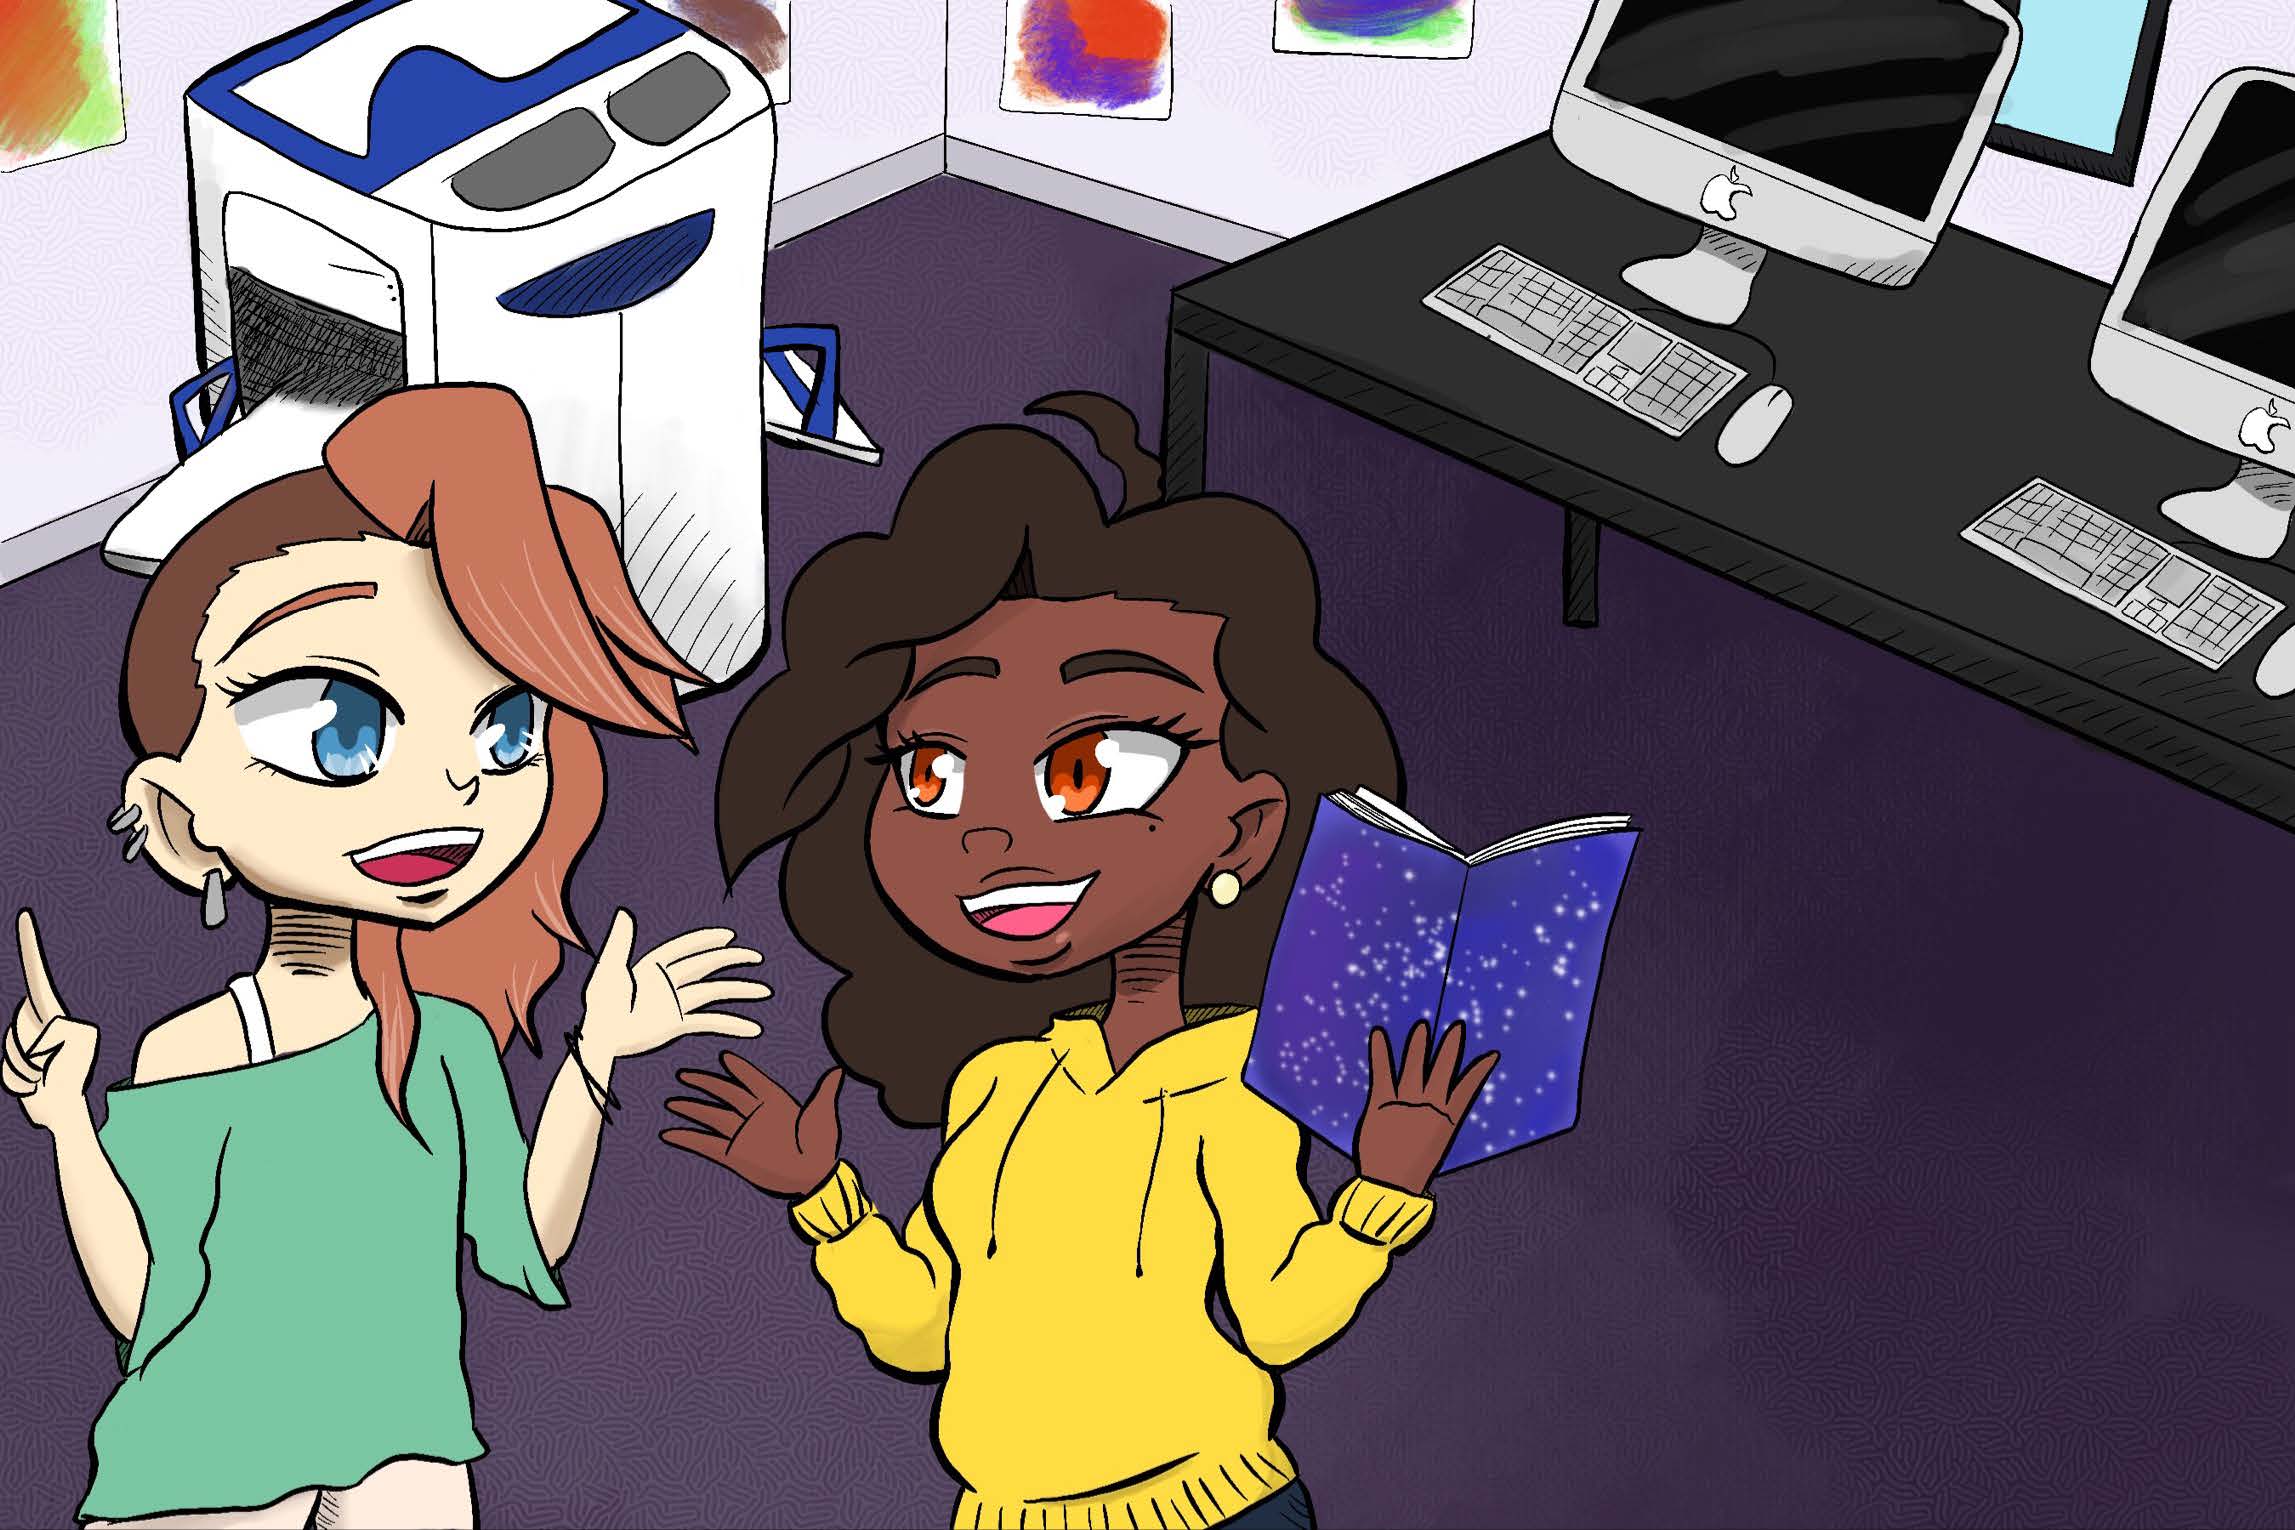 Image shows two illustrated young women in a fun anime style printing and discussing comics in a printing lab space.